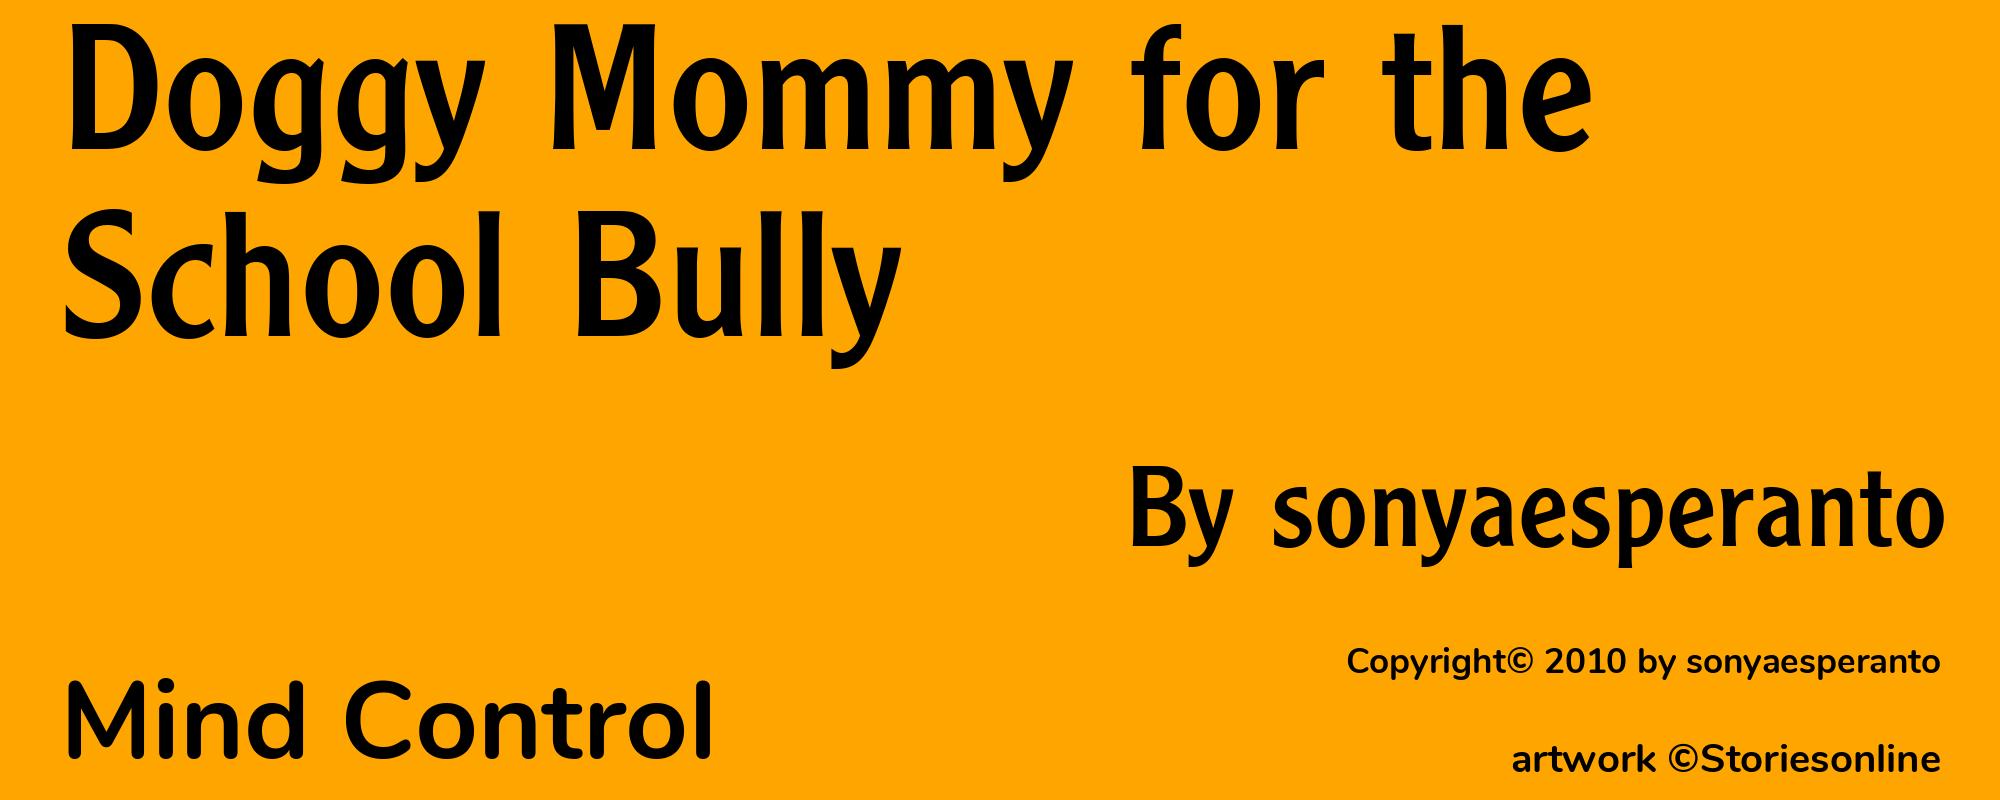 Doggy Mommy for the School Bully - Cover